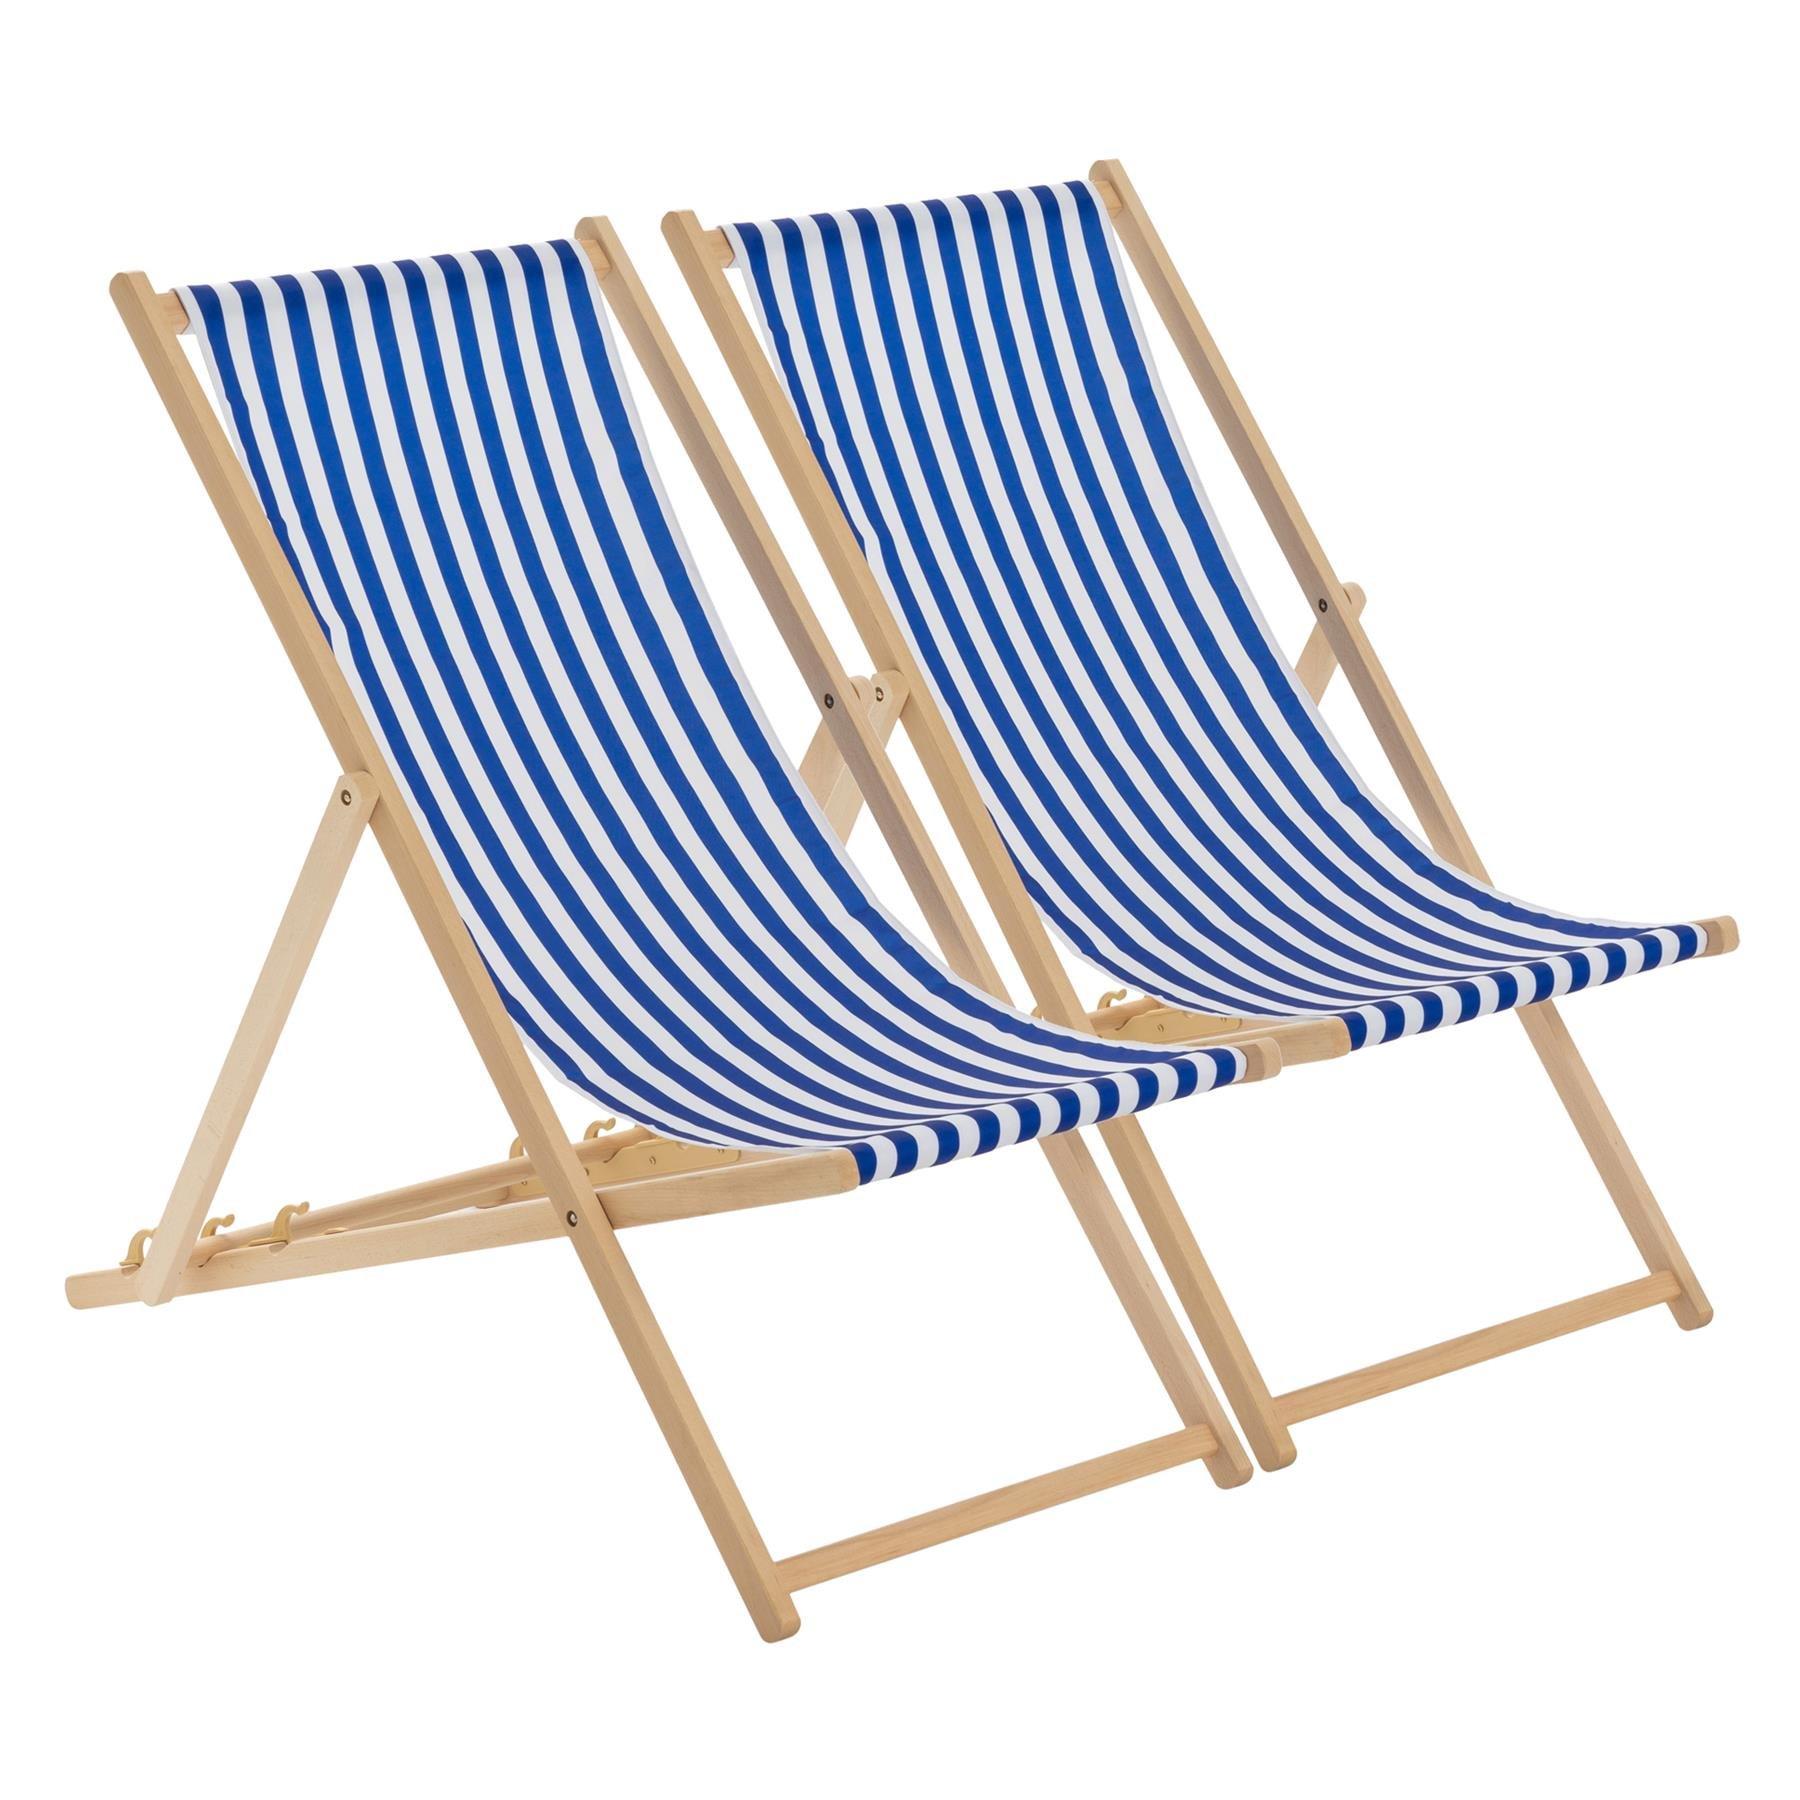 Folding Wooden Deck Chairs Navy Stripe Pack of 2